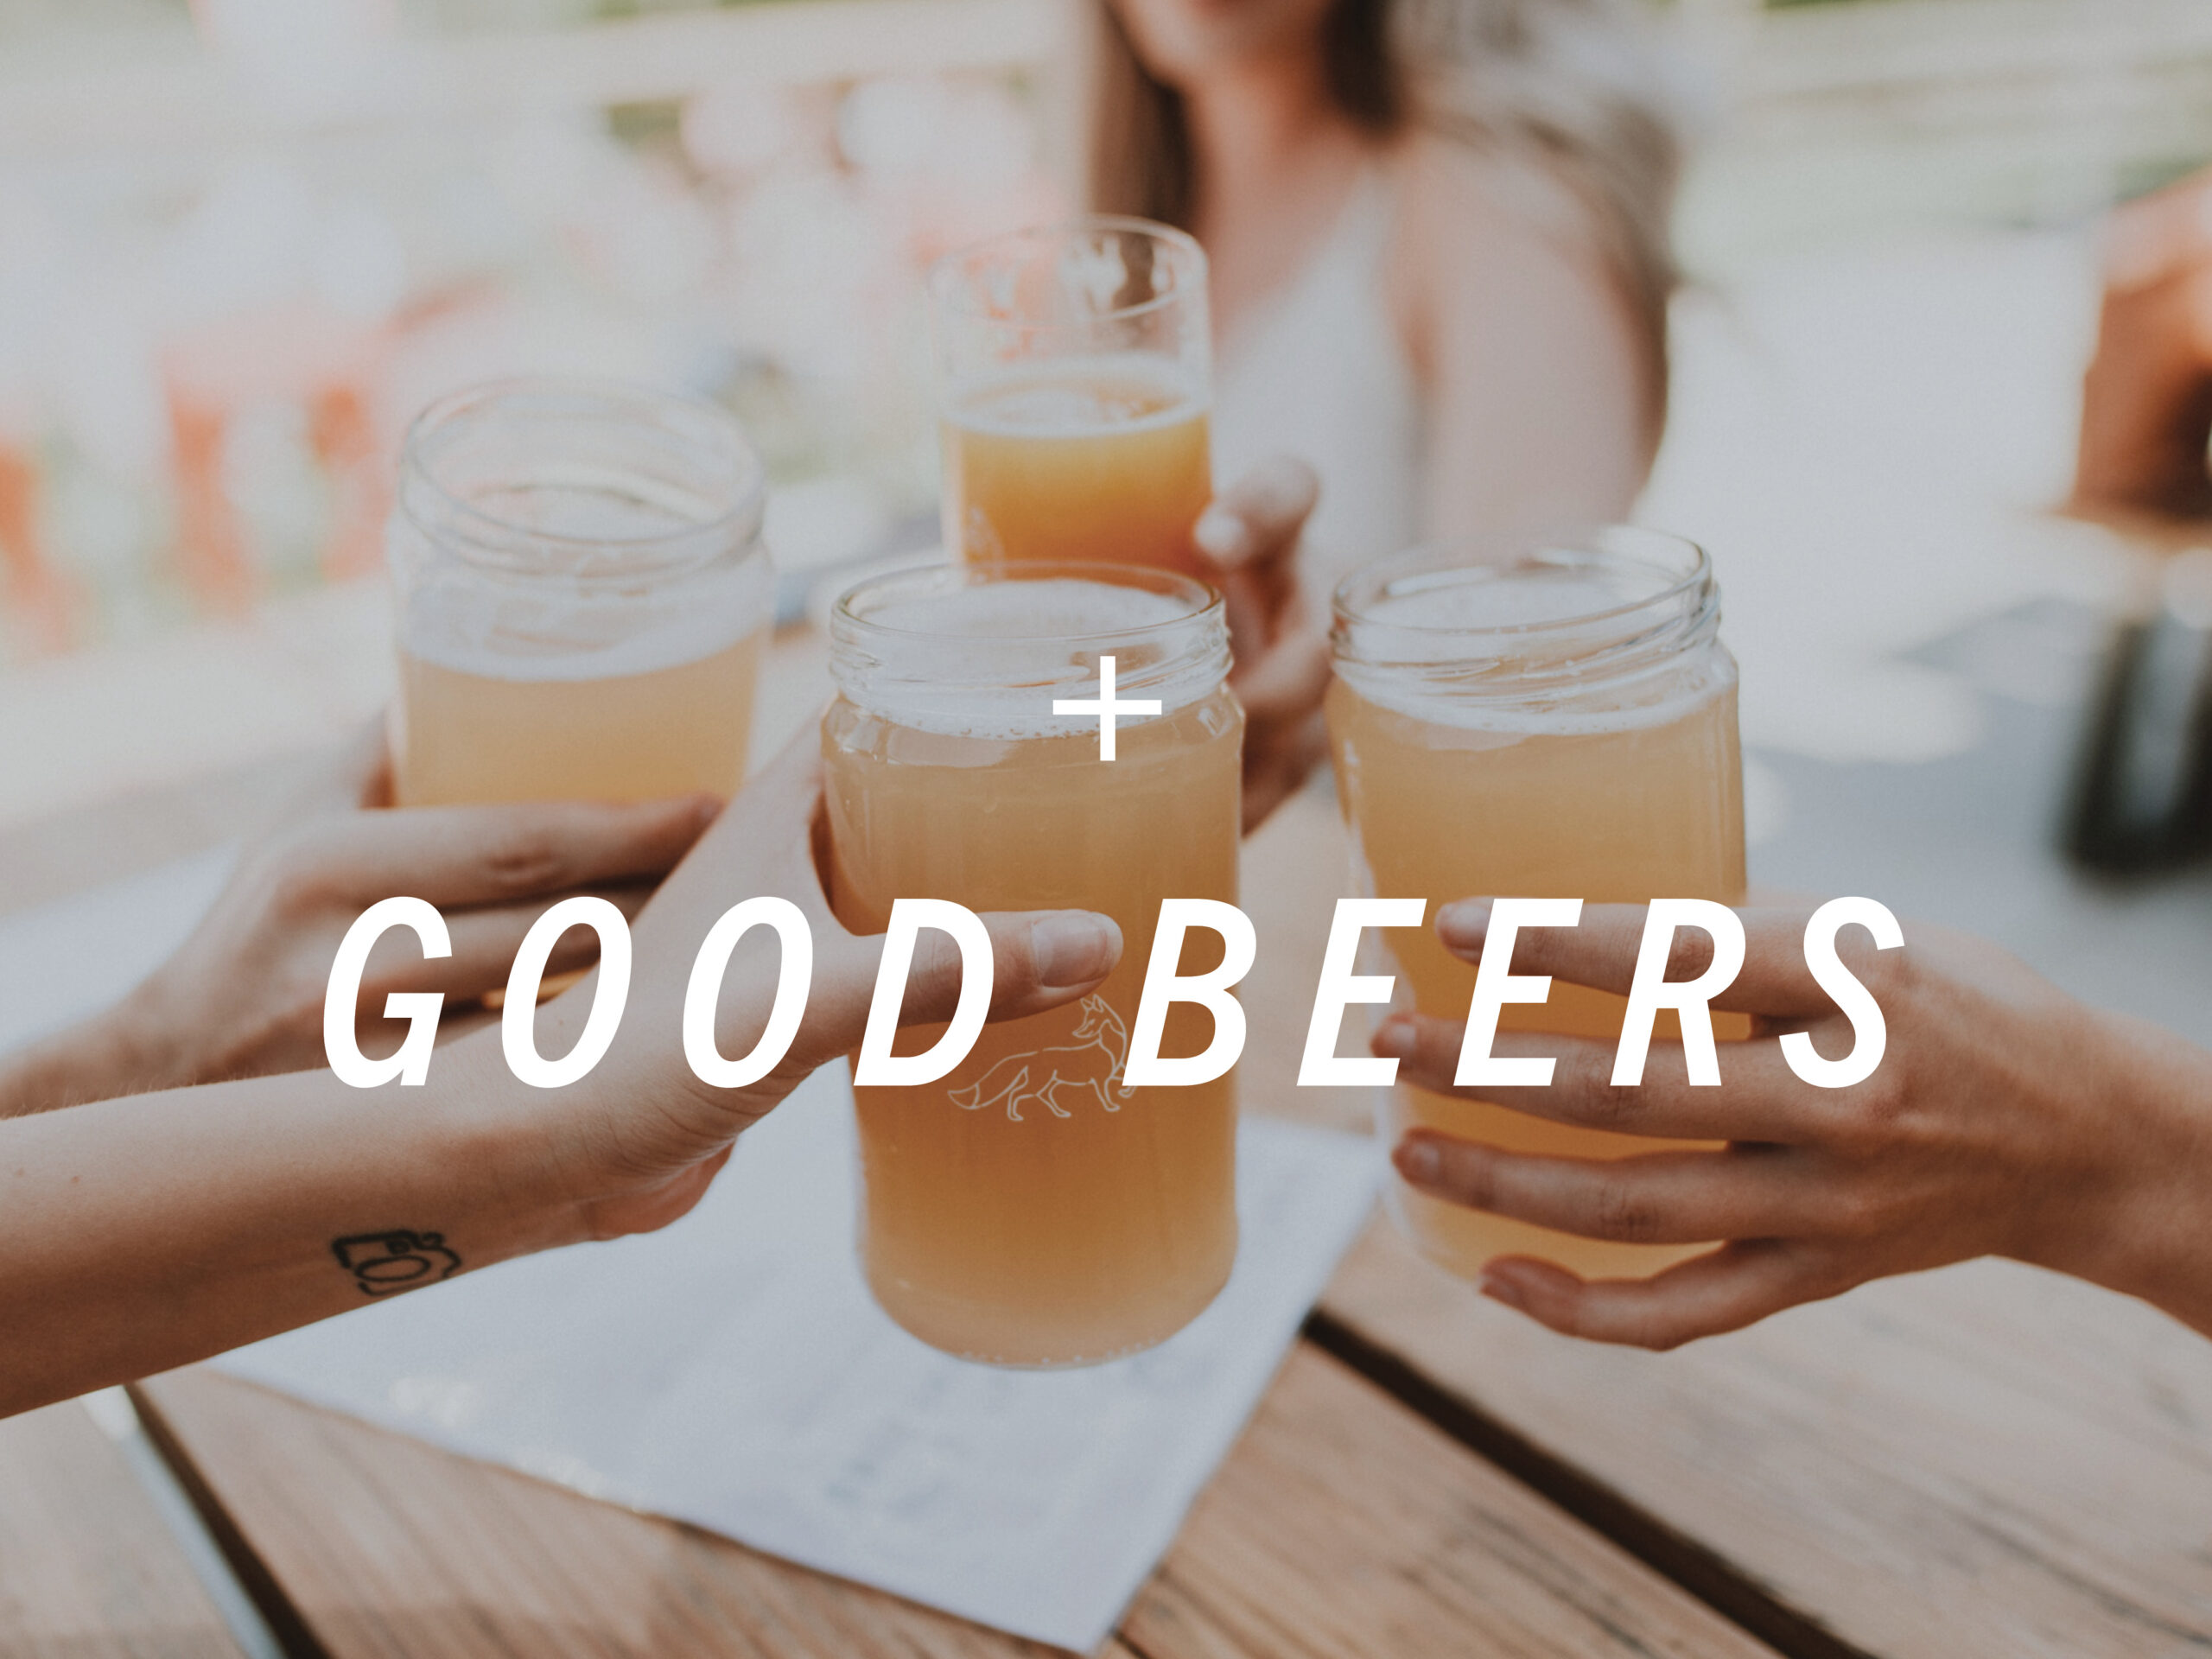 Good Beers at Field House | Field House Brewing